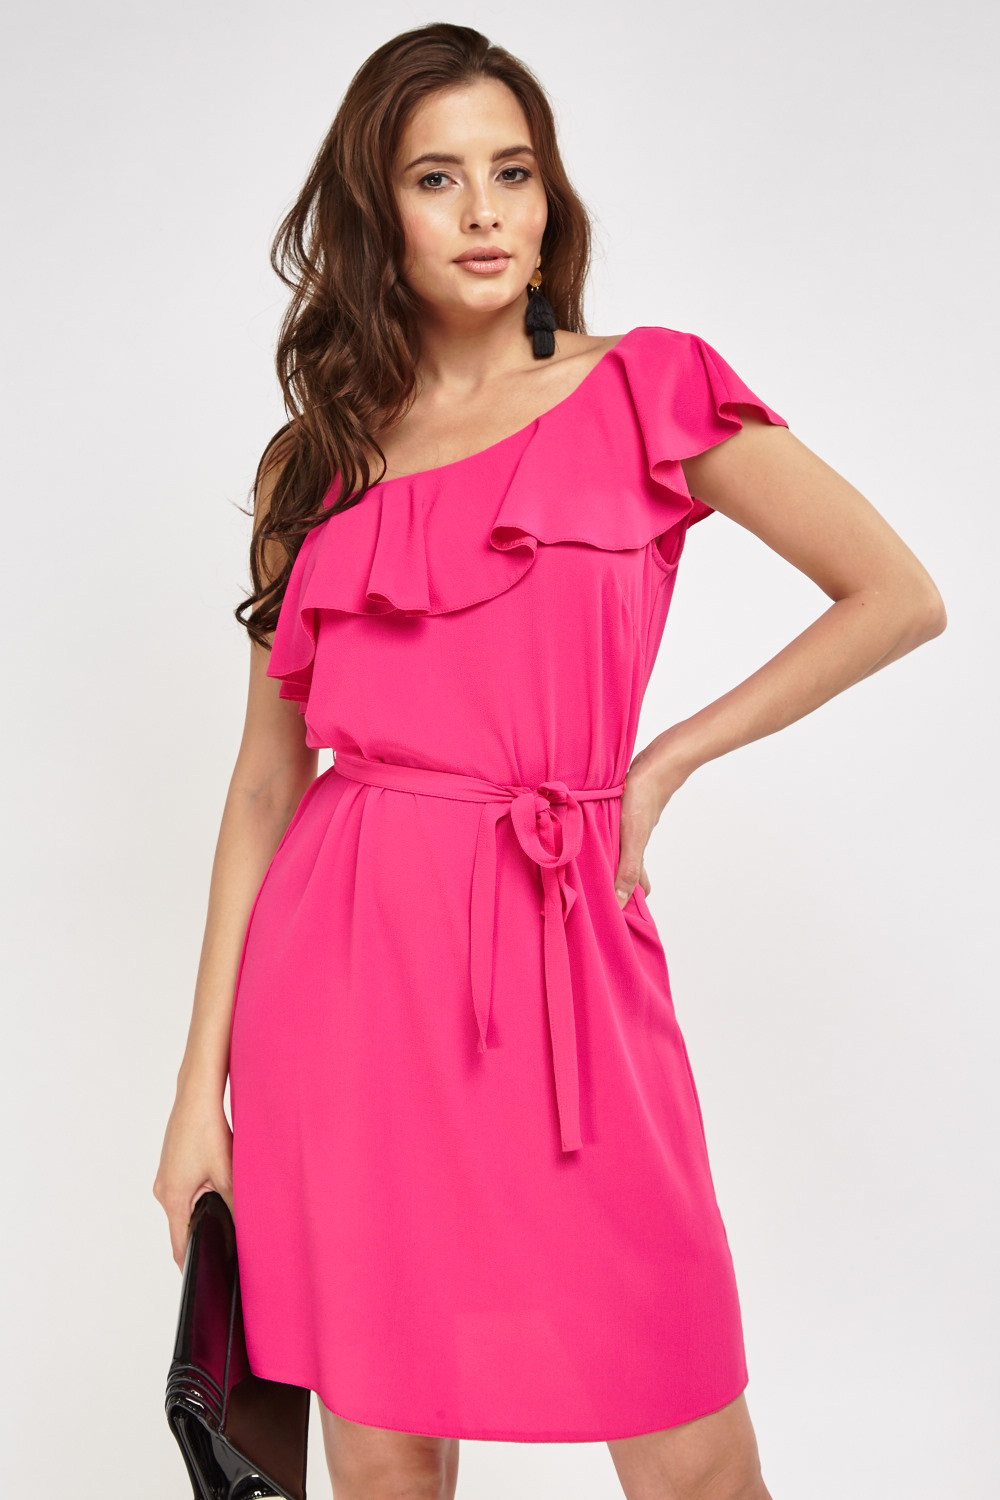 Frilly Asymmetric Tie Up Dress Just 3